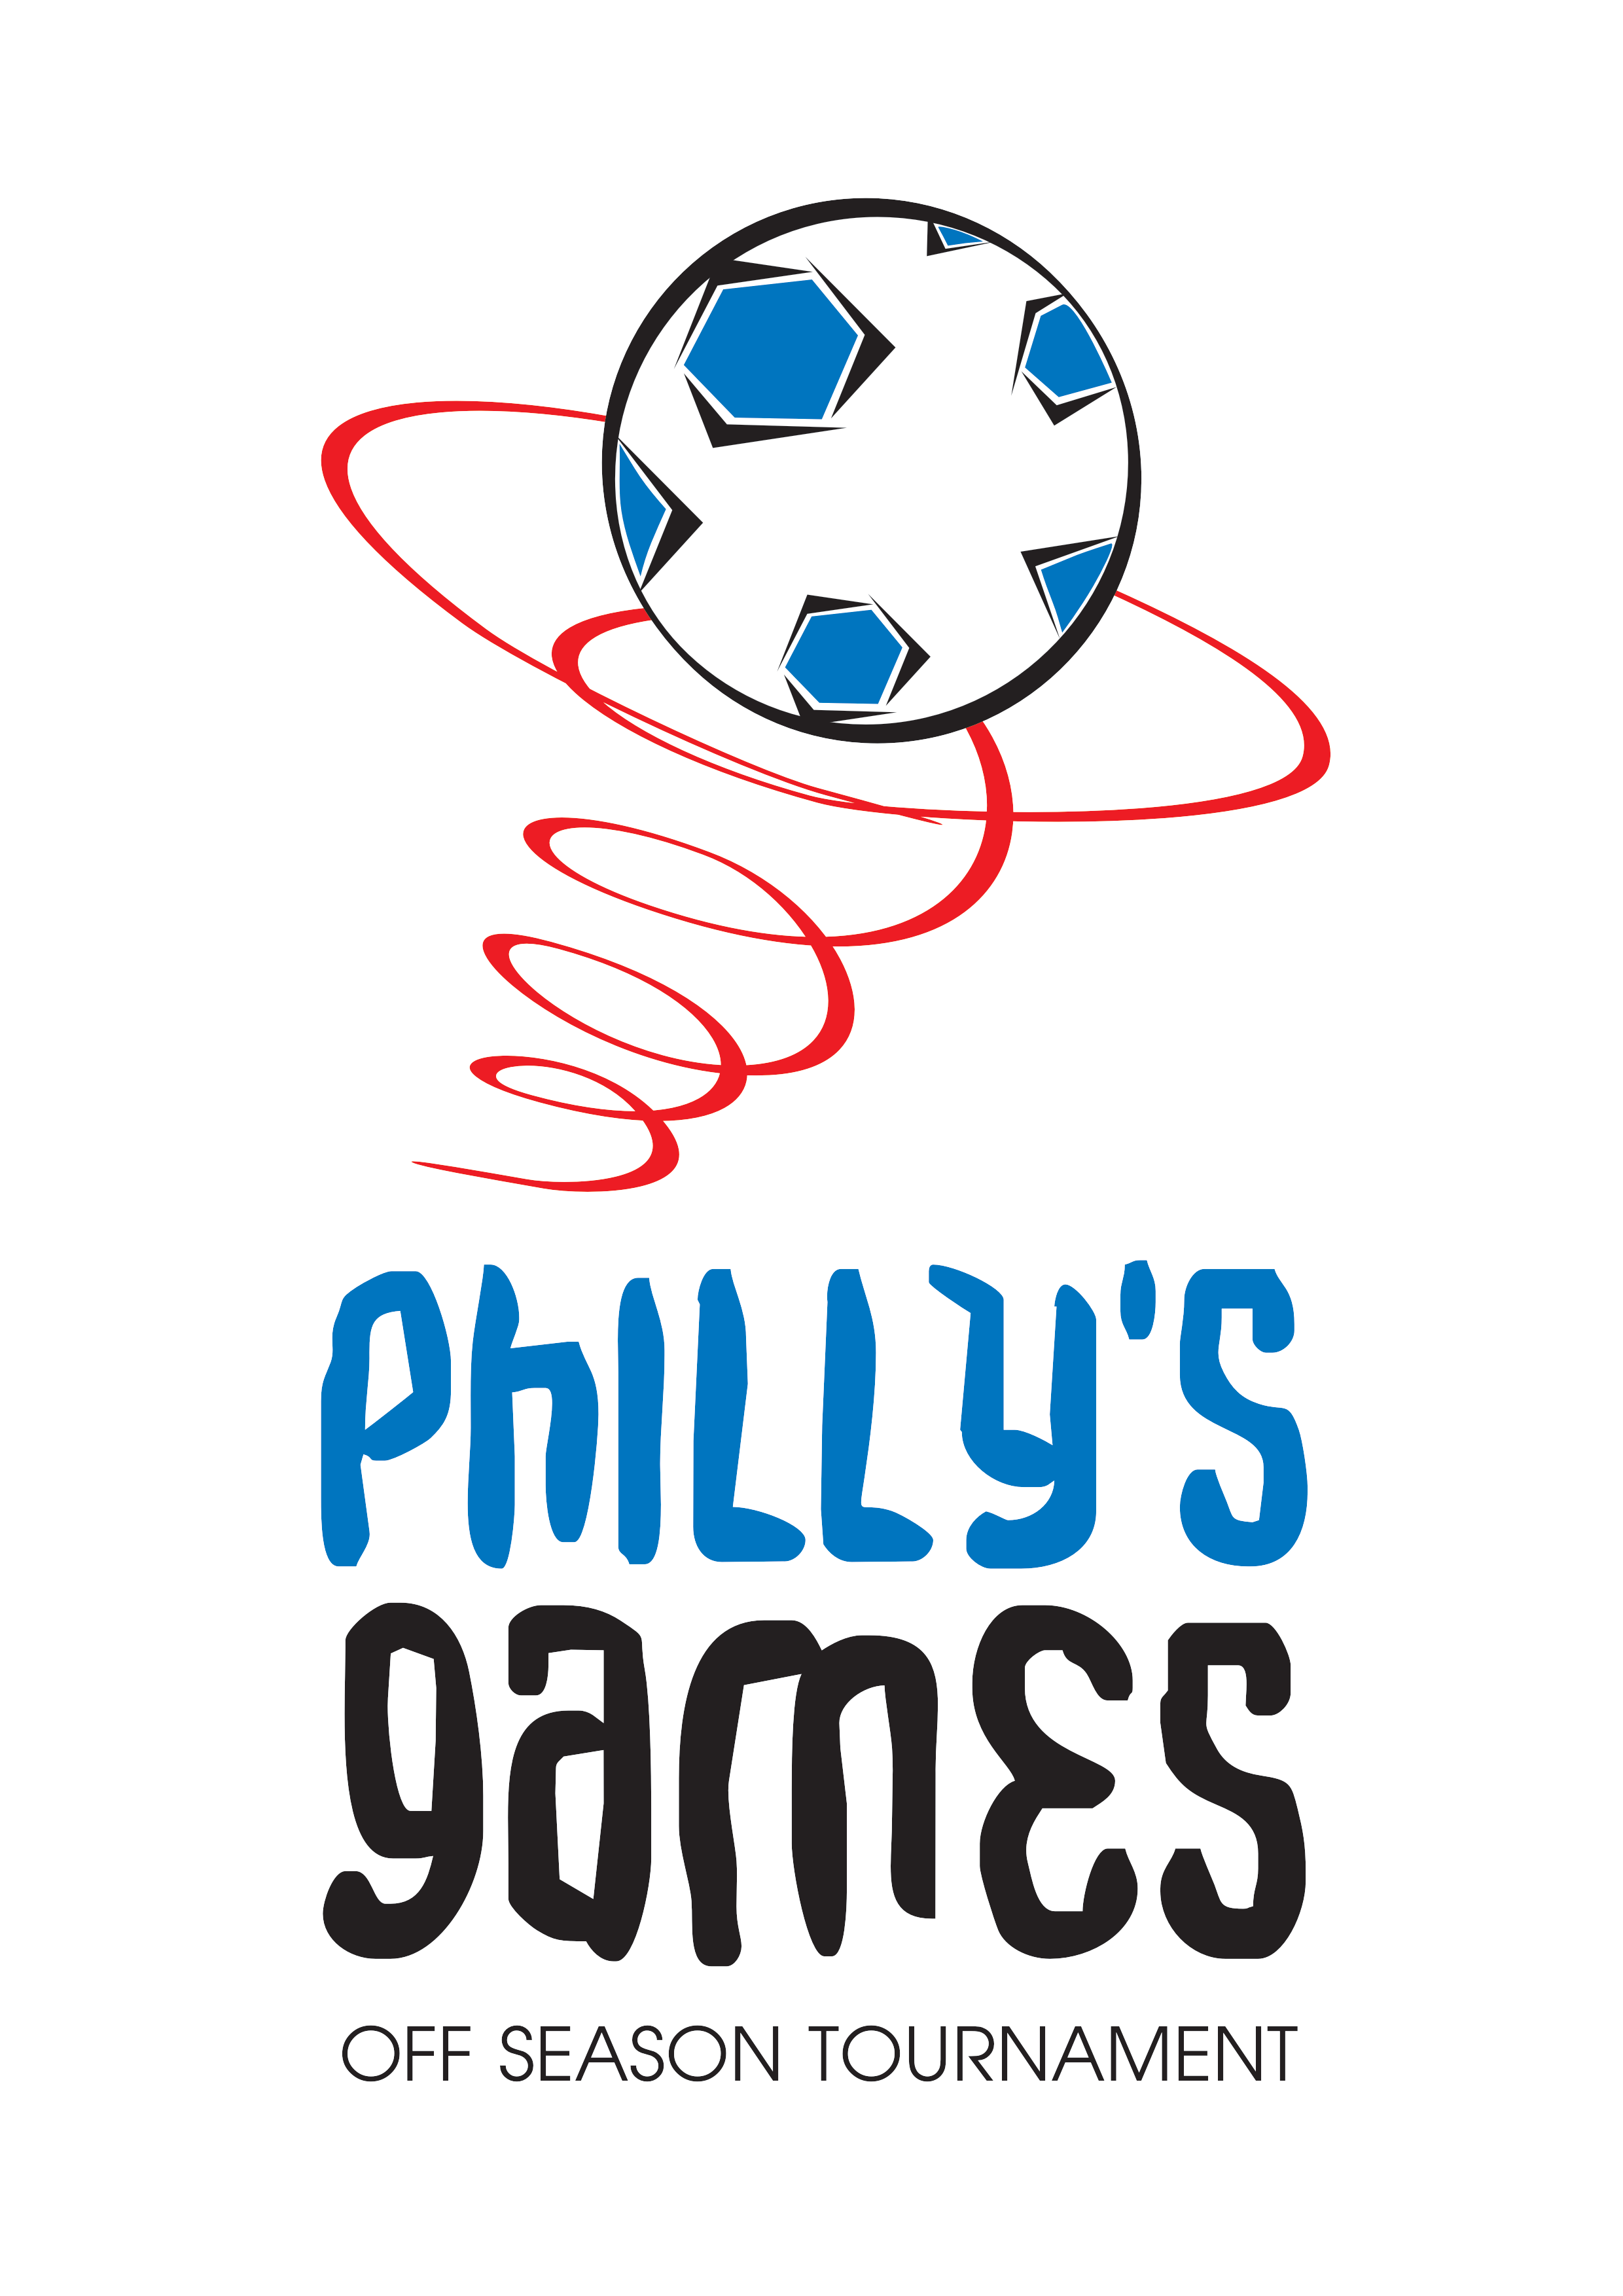 PHILLY'S GAMES